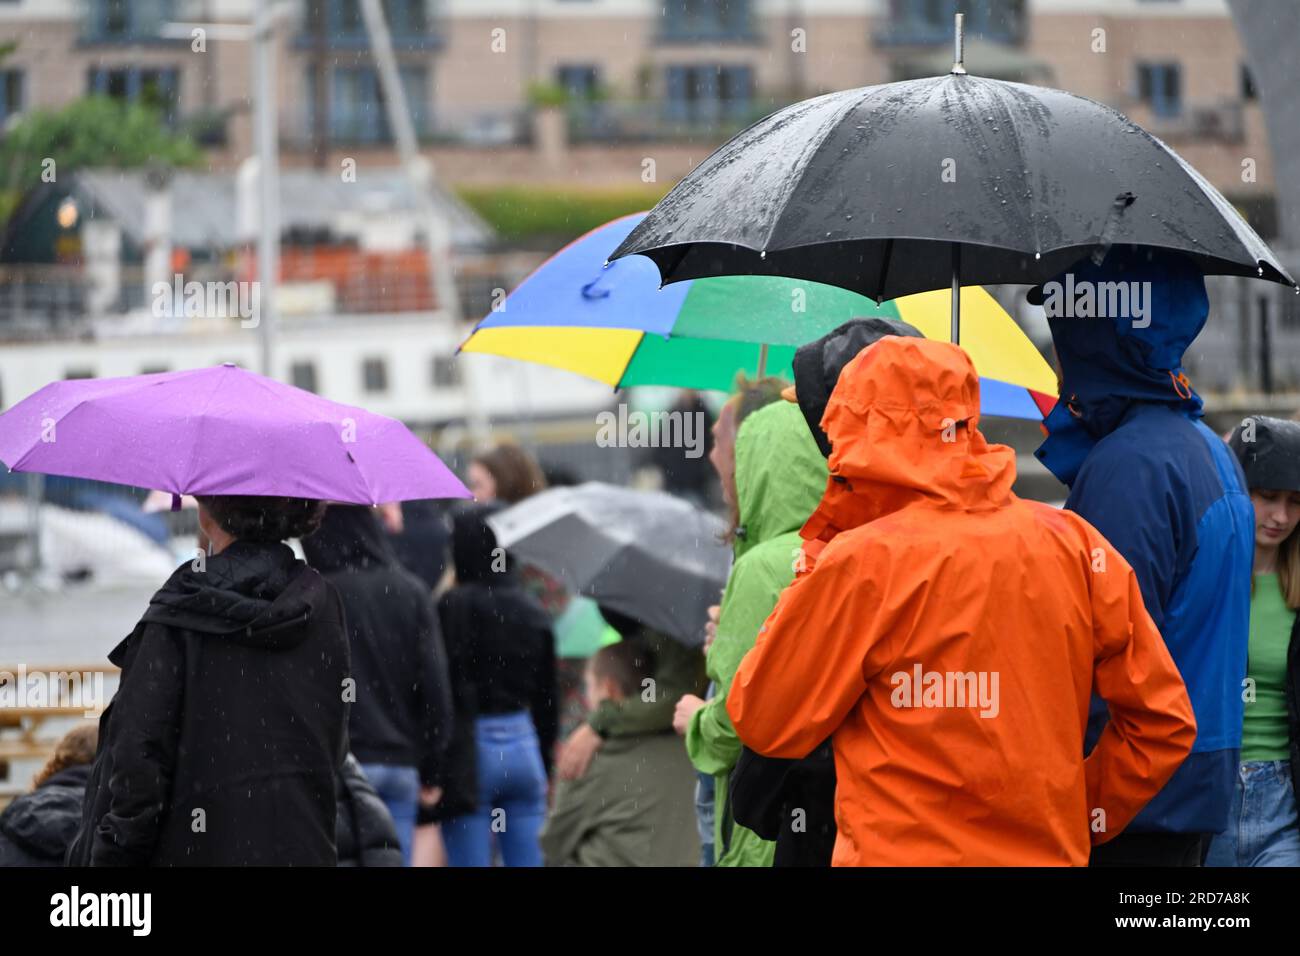 Umbrellas and rain coats out in stormy weather Stock Photo